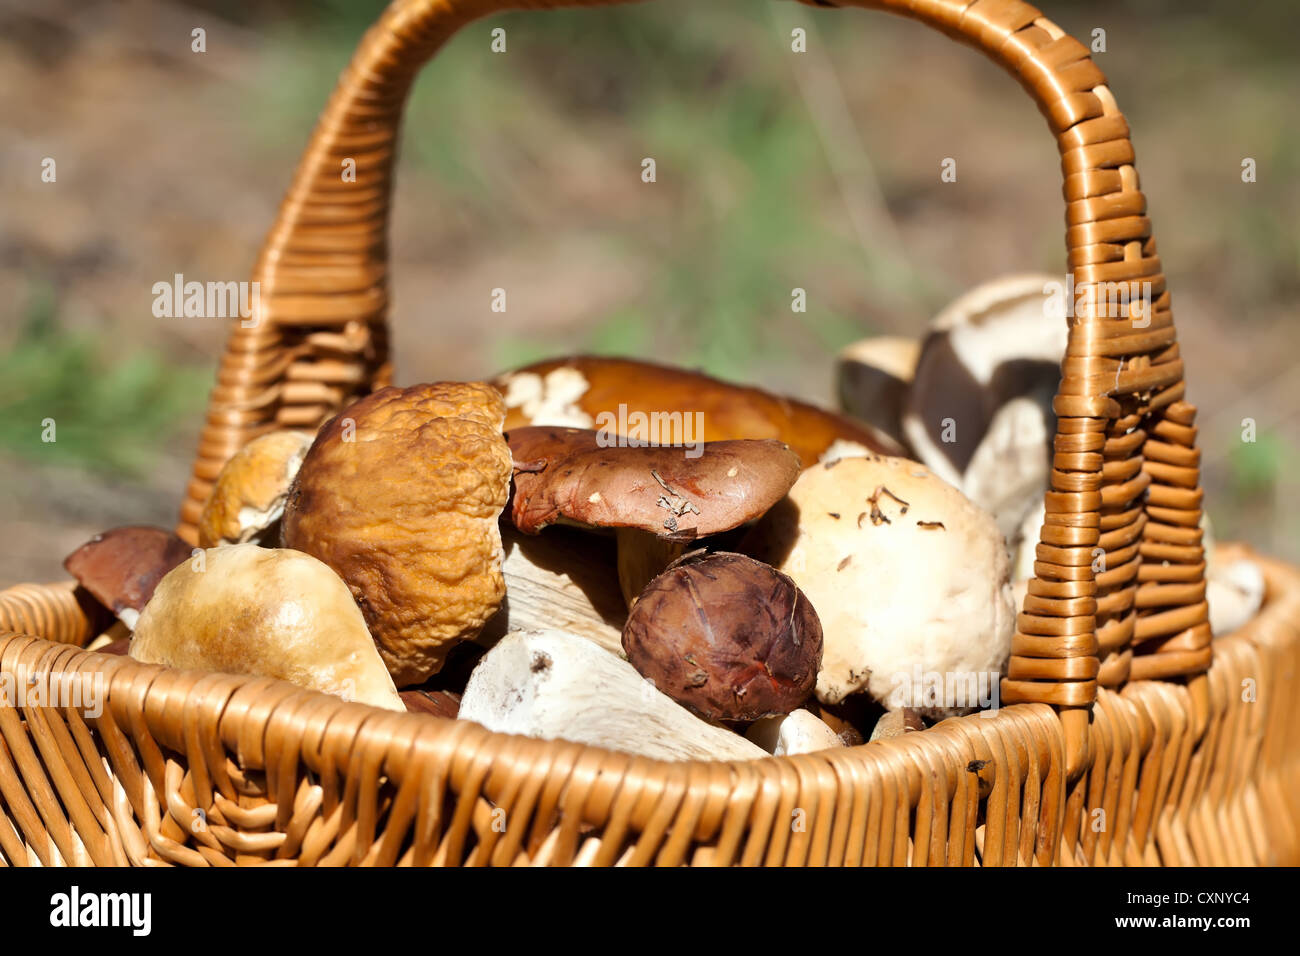 Basket with different autumn mushrooms Stock Photo